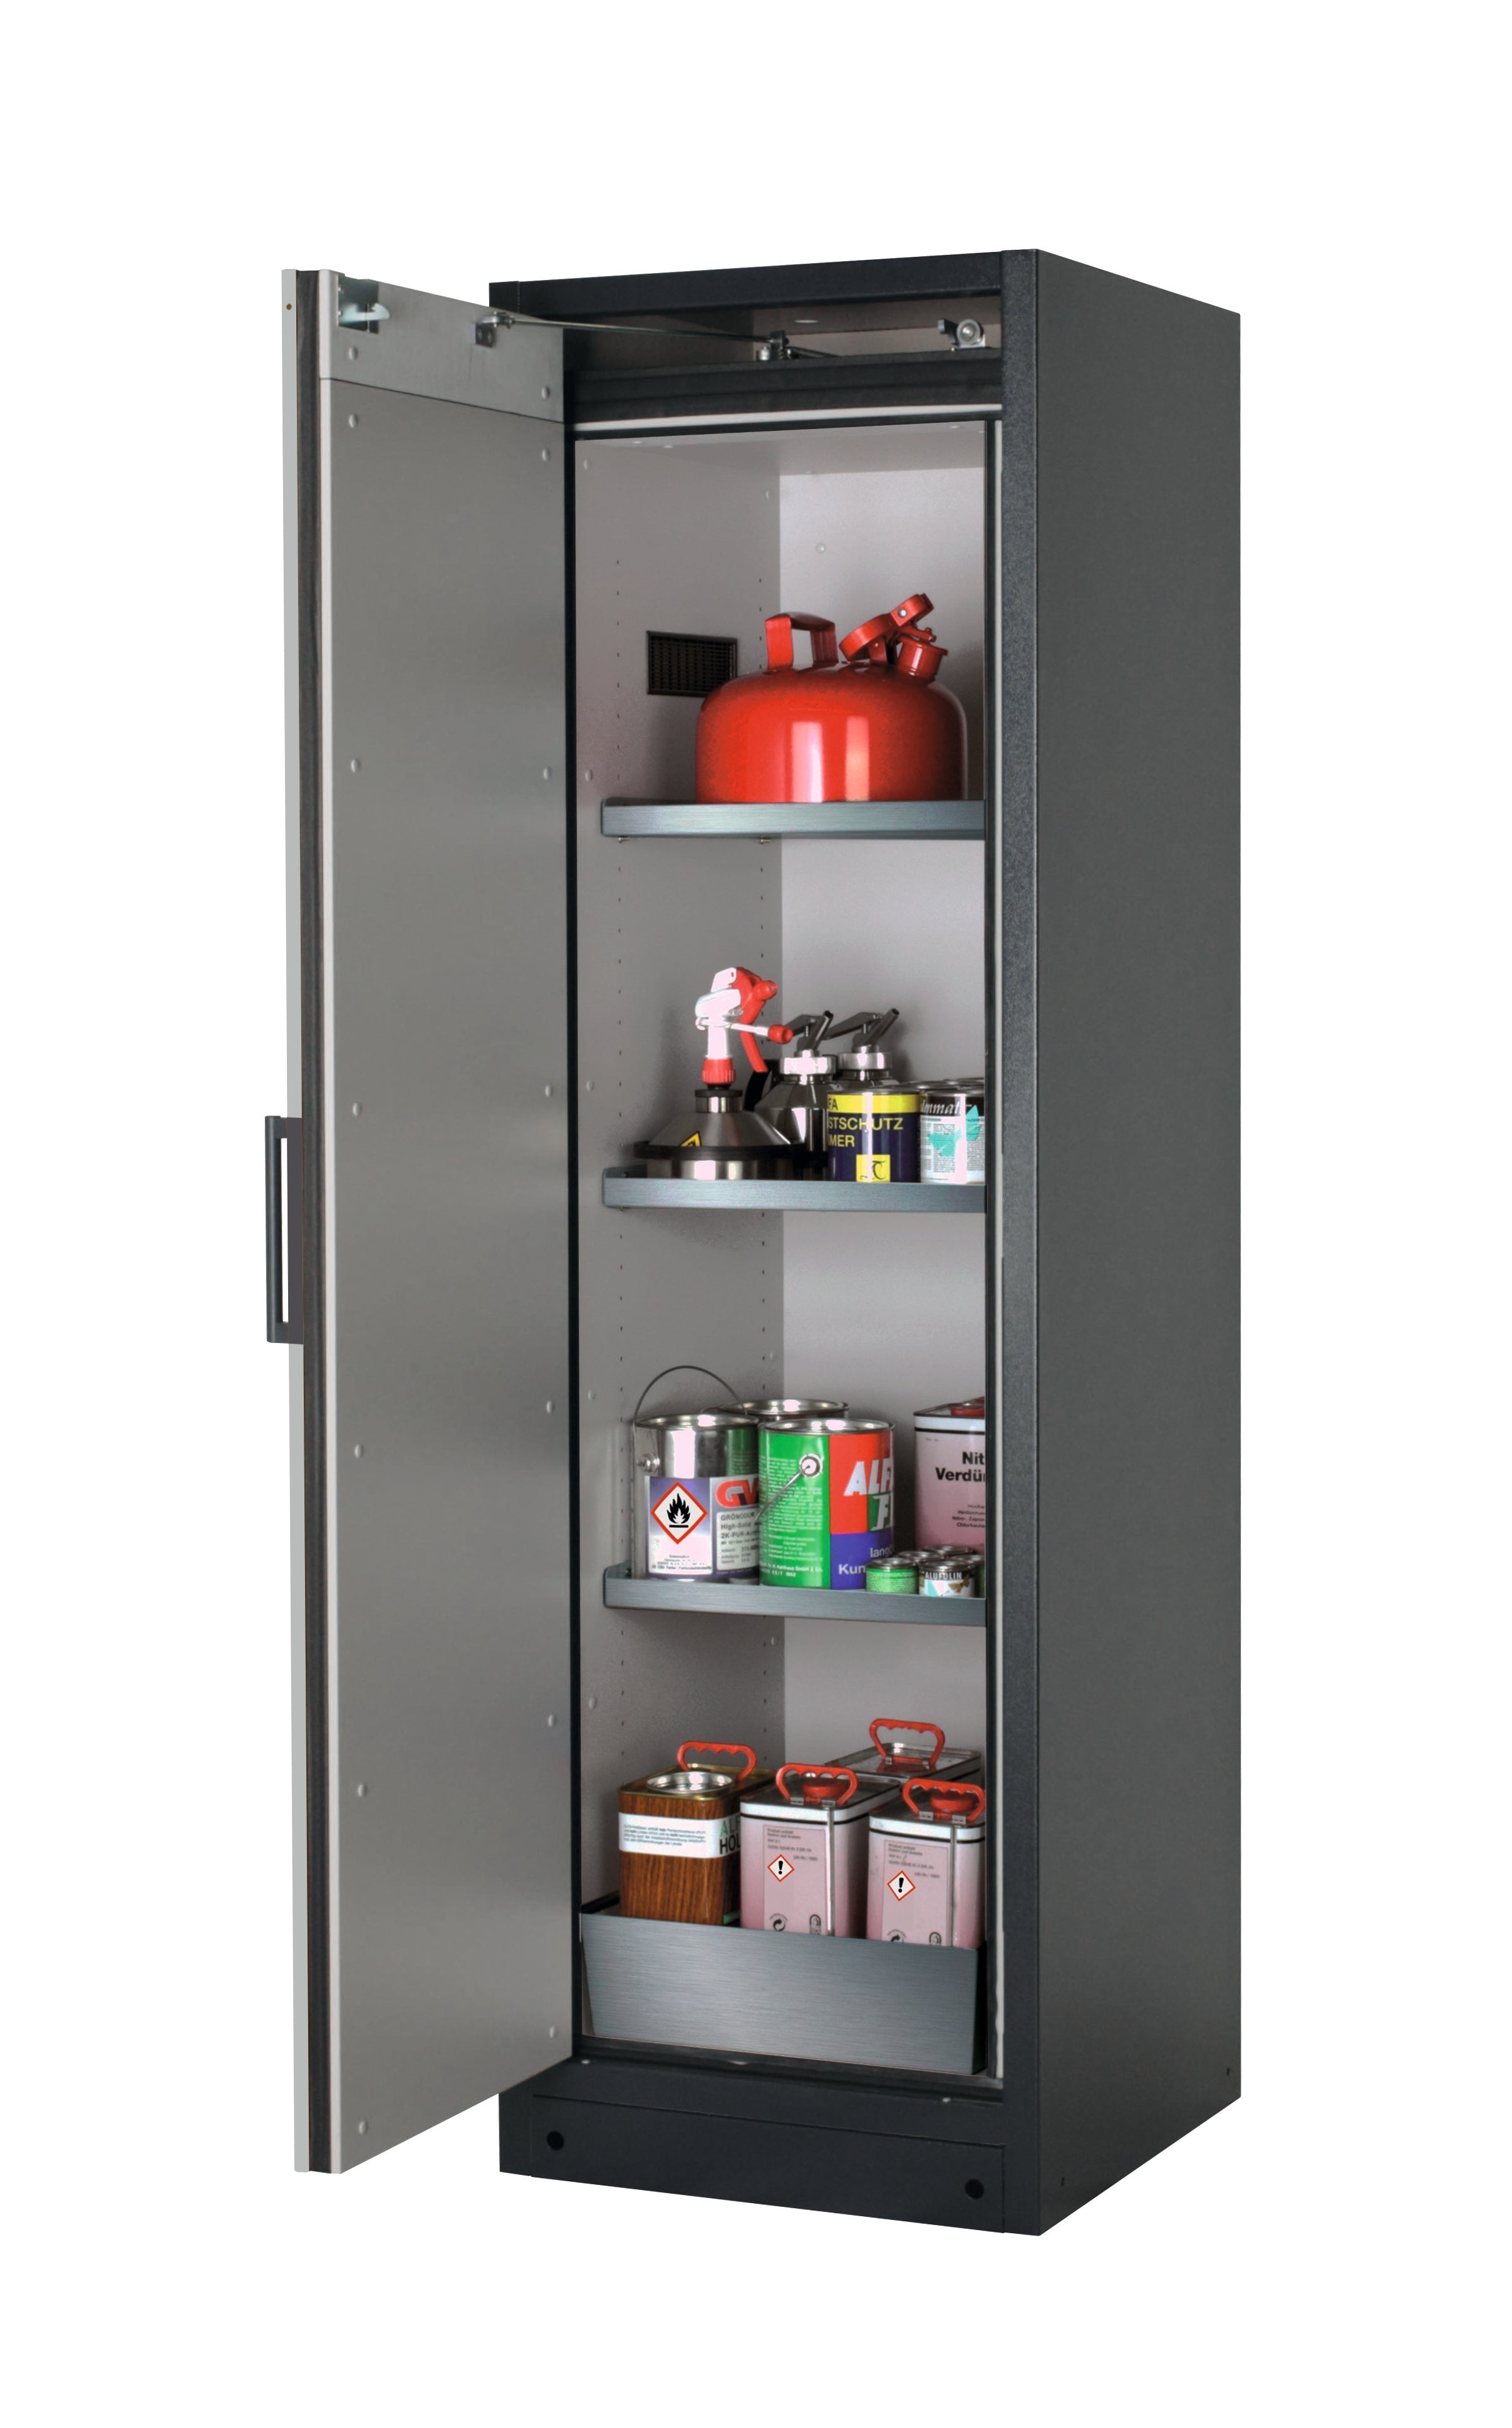 Type 90 safety storage cabinet Q-PEGASUS-90 model Q90.195.060.WDAC in pure white RAL 9010 with 3x shelf standard (stainless steel 1.4301),